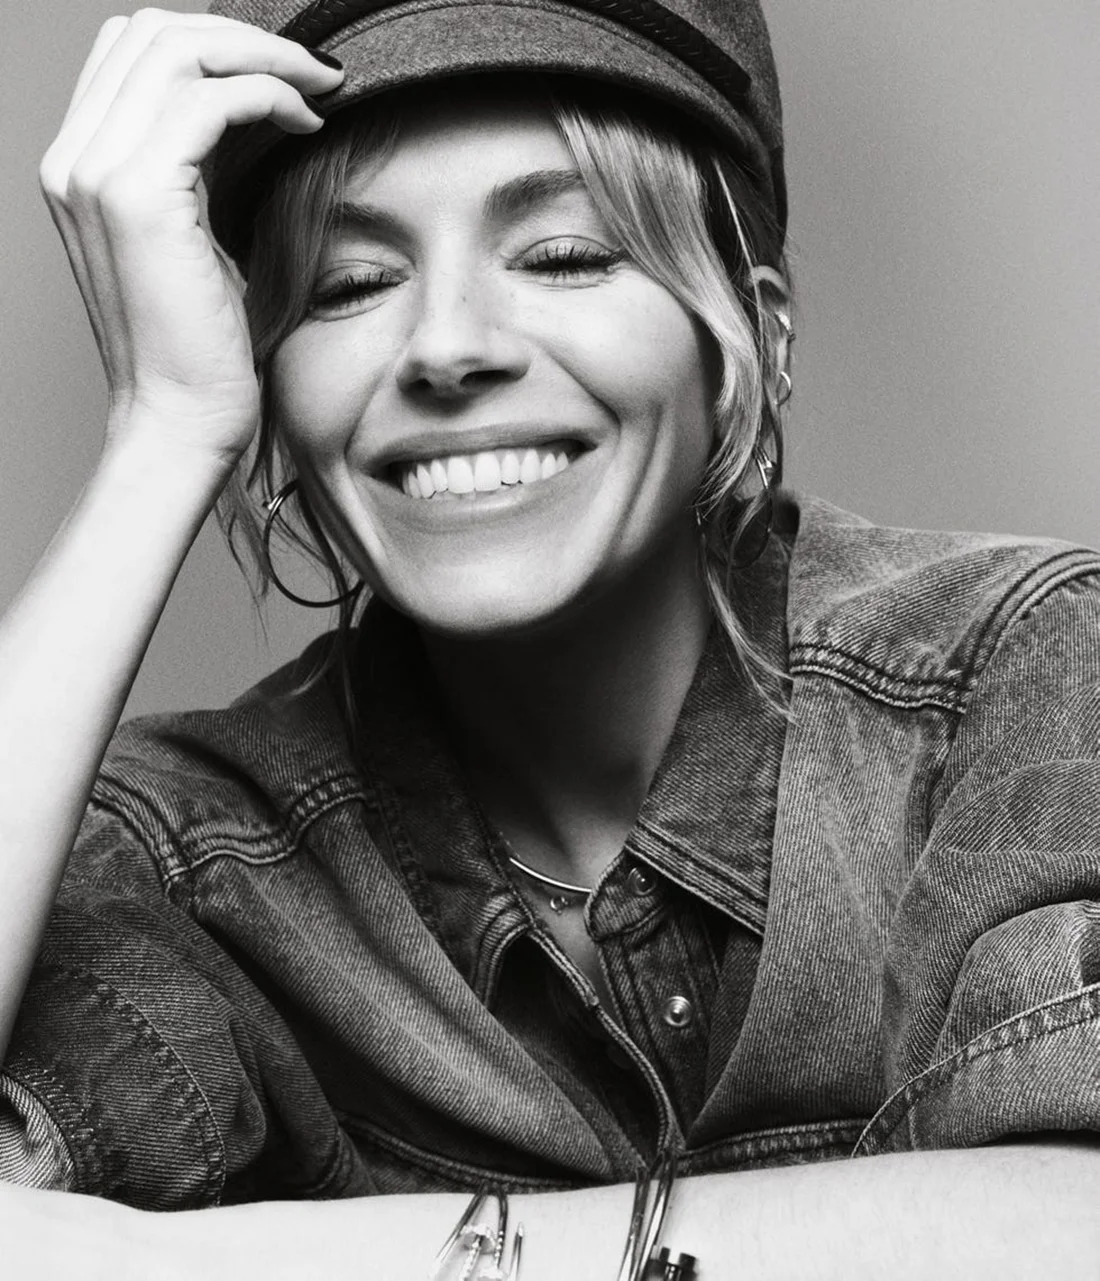 Sienna Miller covers Elle UK May 2022 by Tom Schirmacher